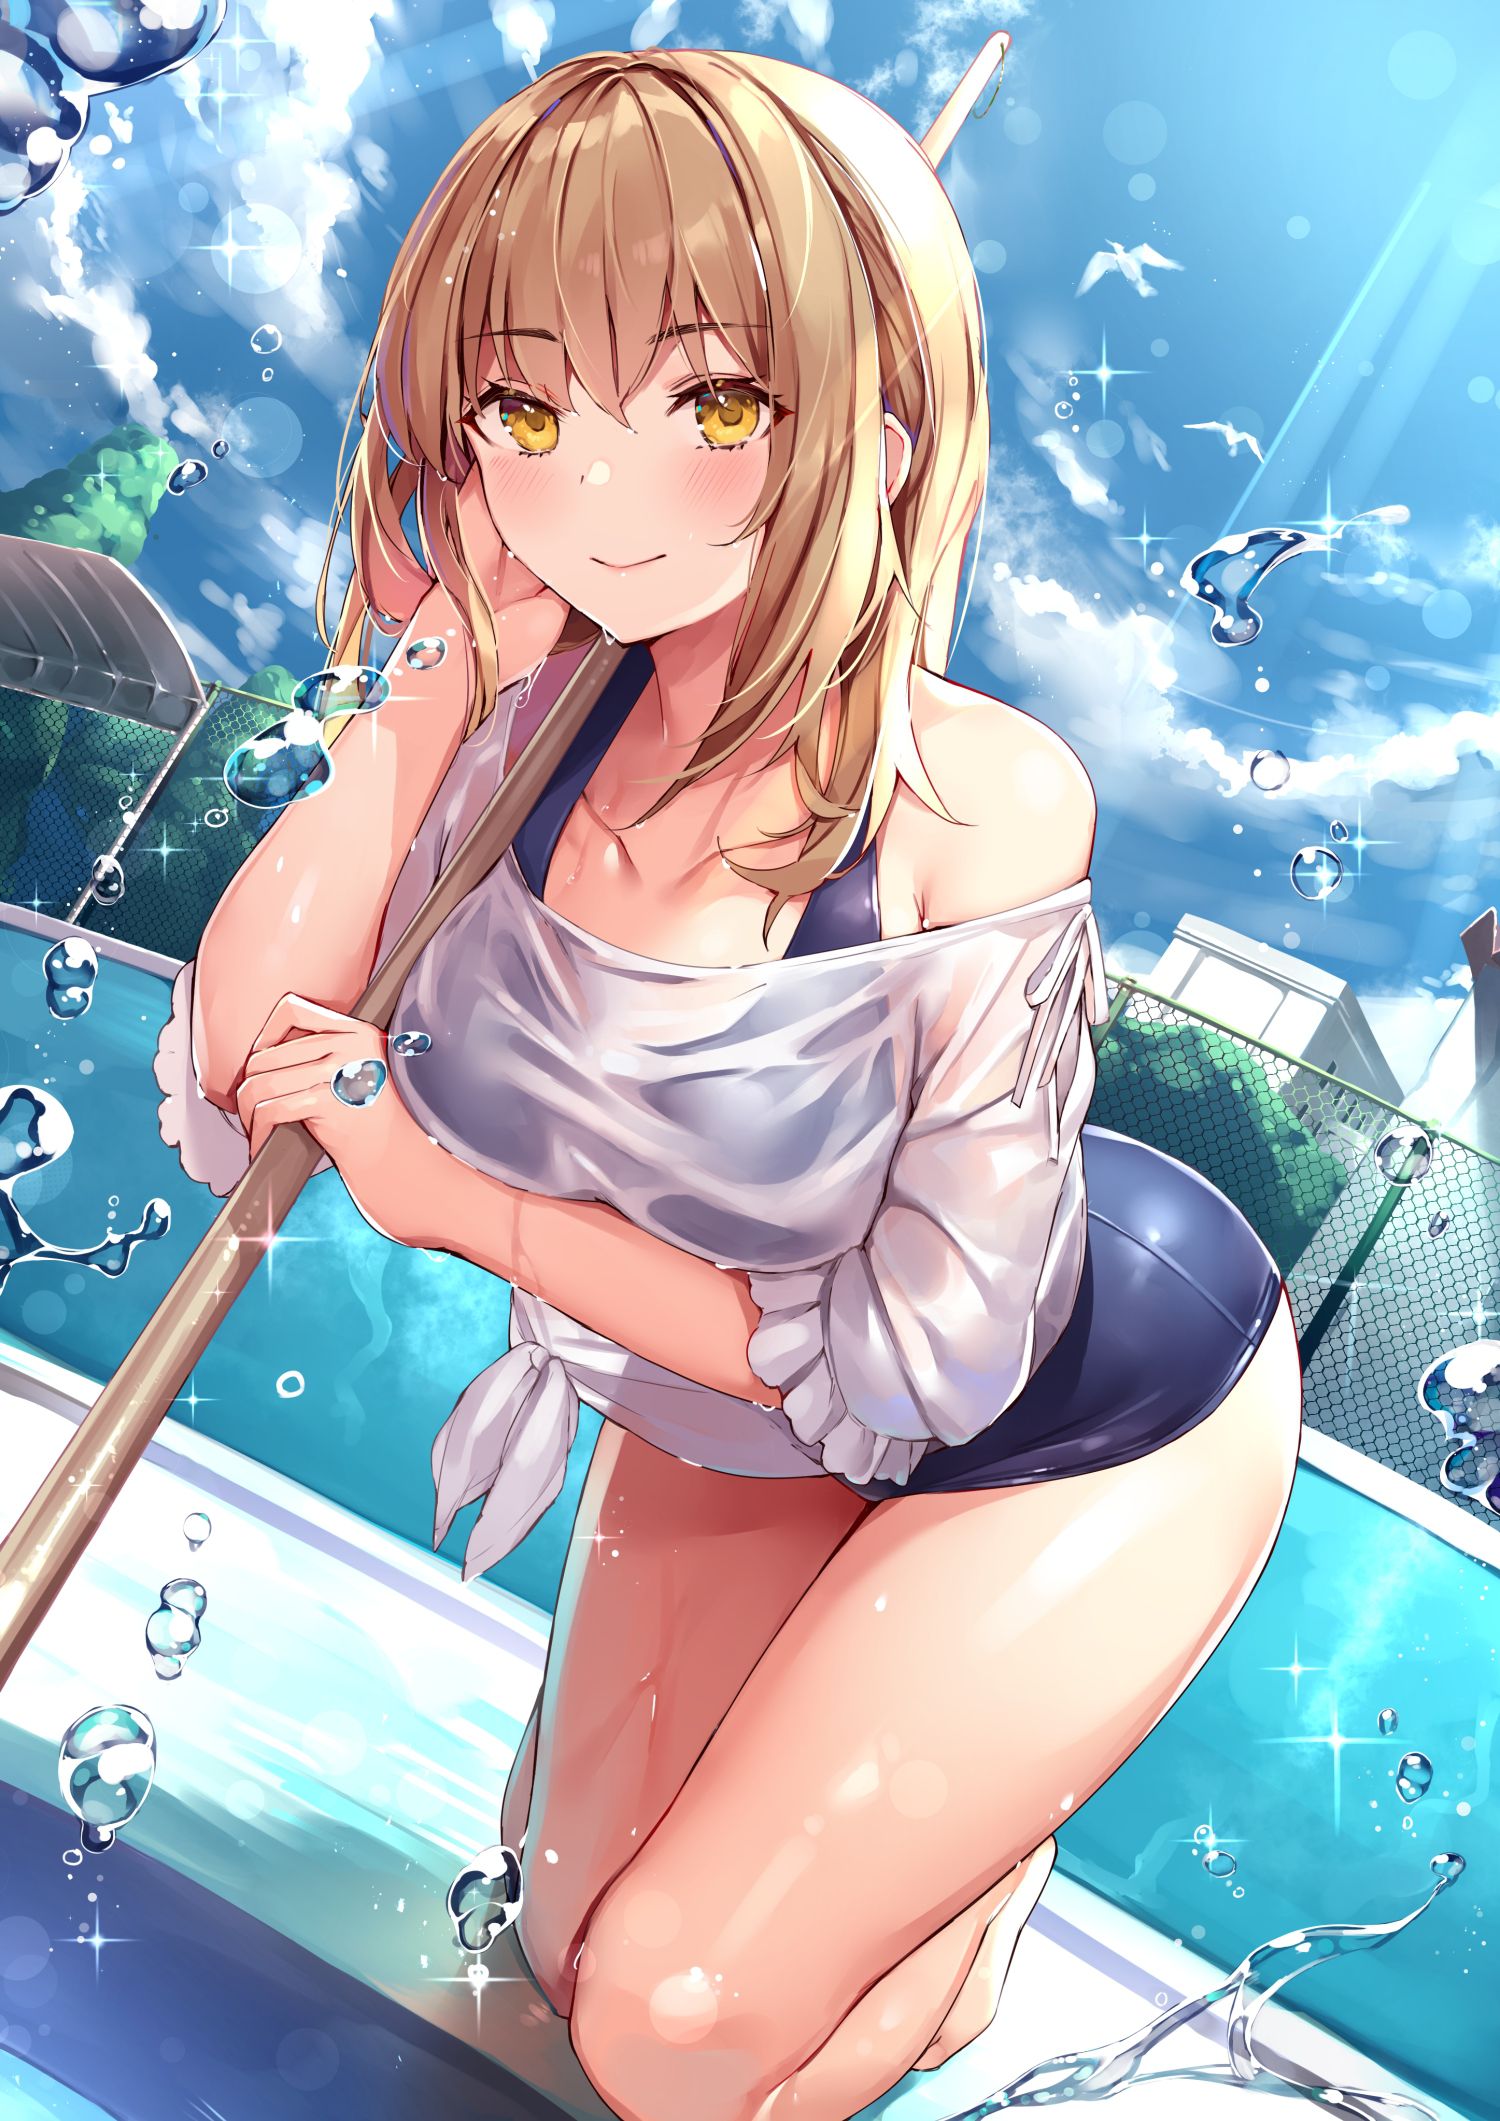 Erotic anime summary Erotic image collection of wet transparent beauties and beautiful girls that are transparent variously [50 sheets] 20